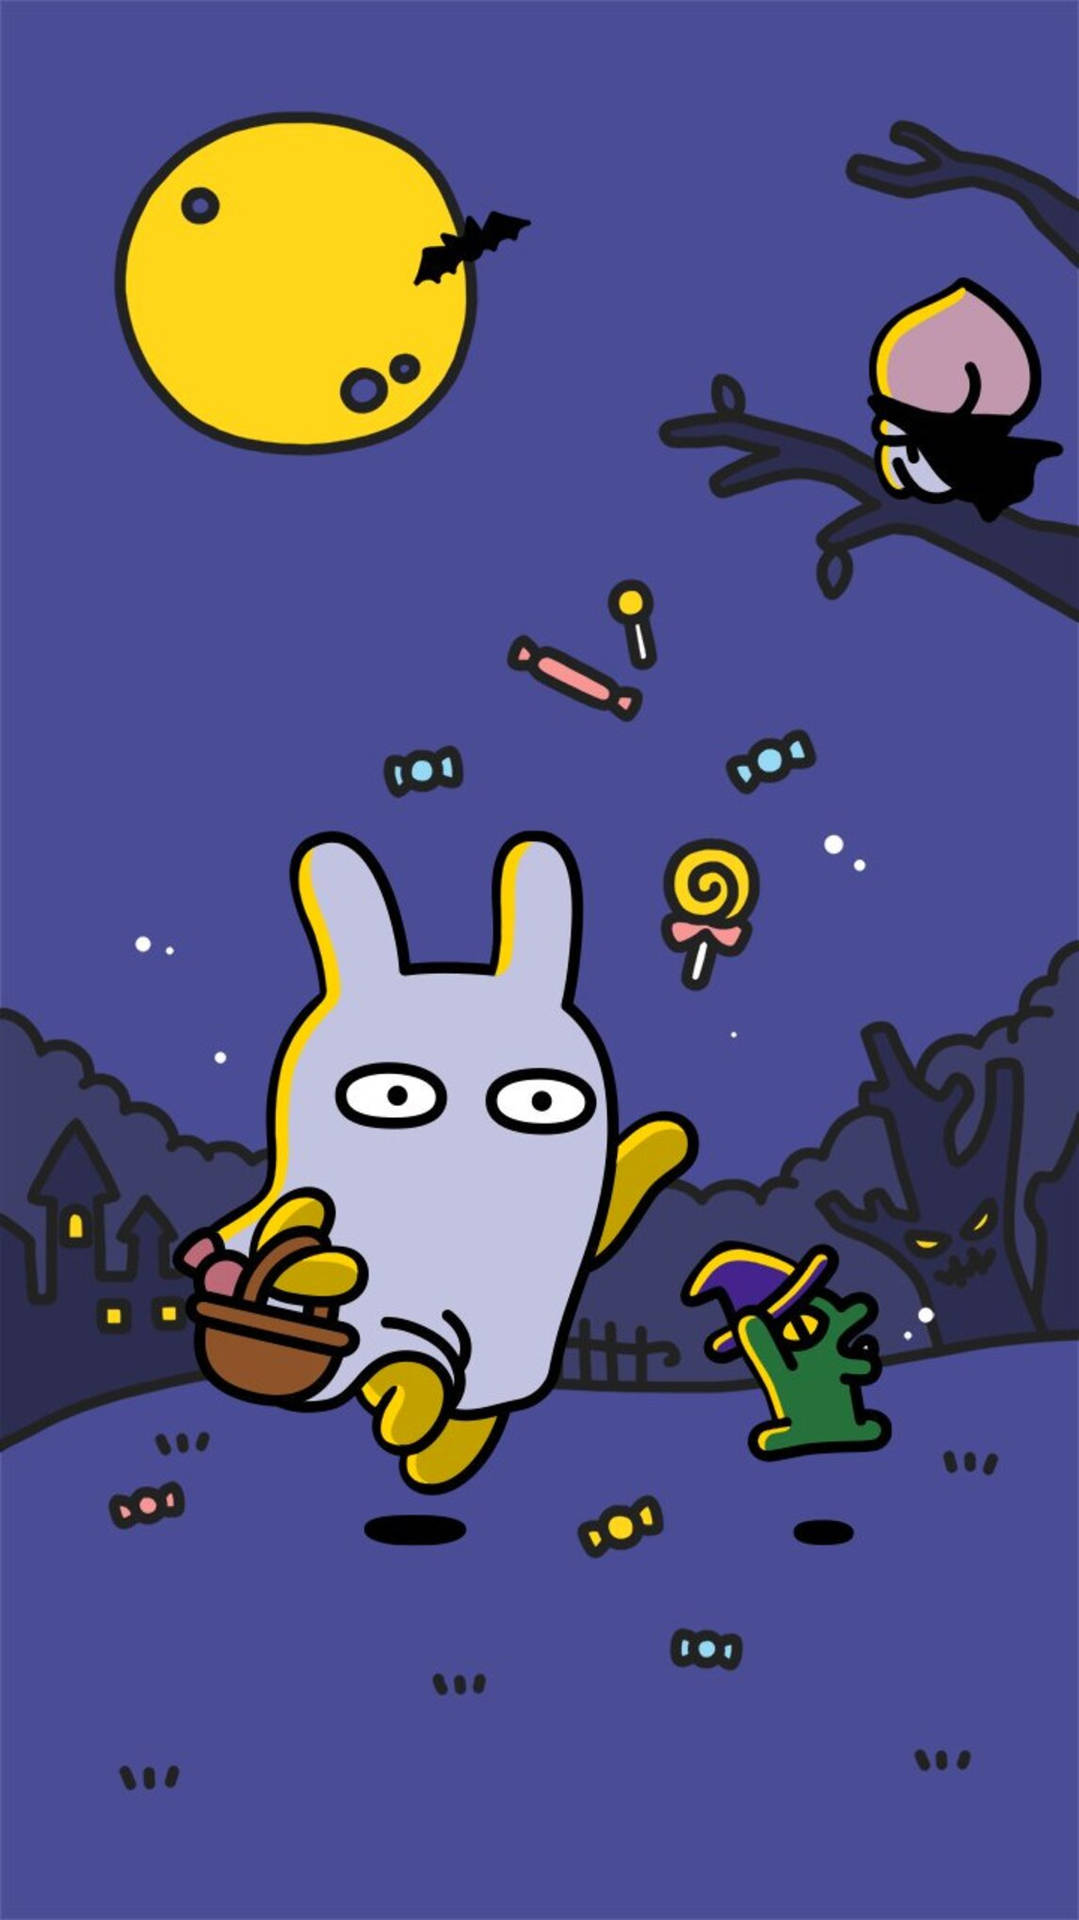 Get Ready For A Spooky Kakao Friends Halloween! Background